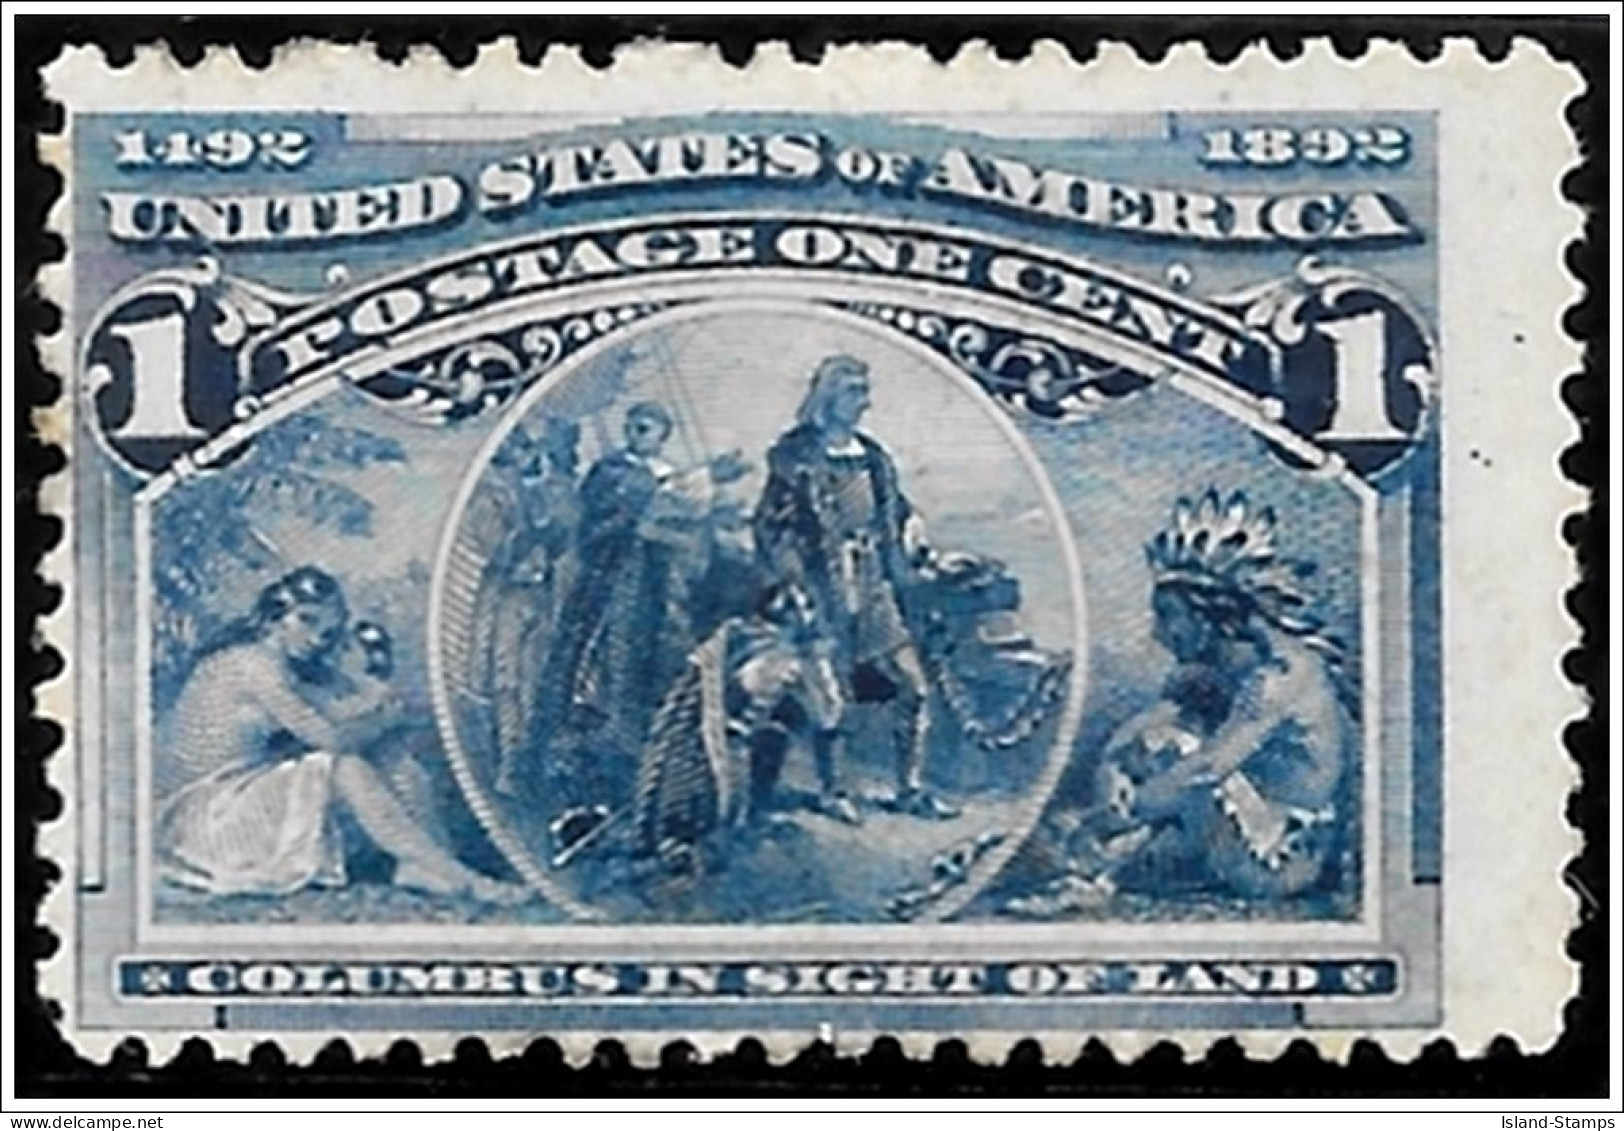 USA - 1893 Columbian Exposition Issue 1 Cent - Mounted Mint - Unused Stamps